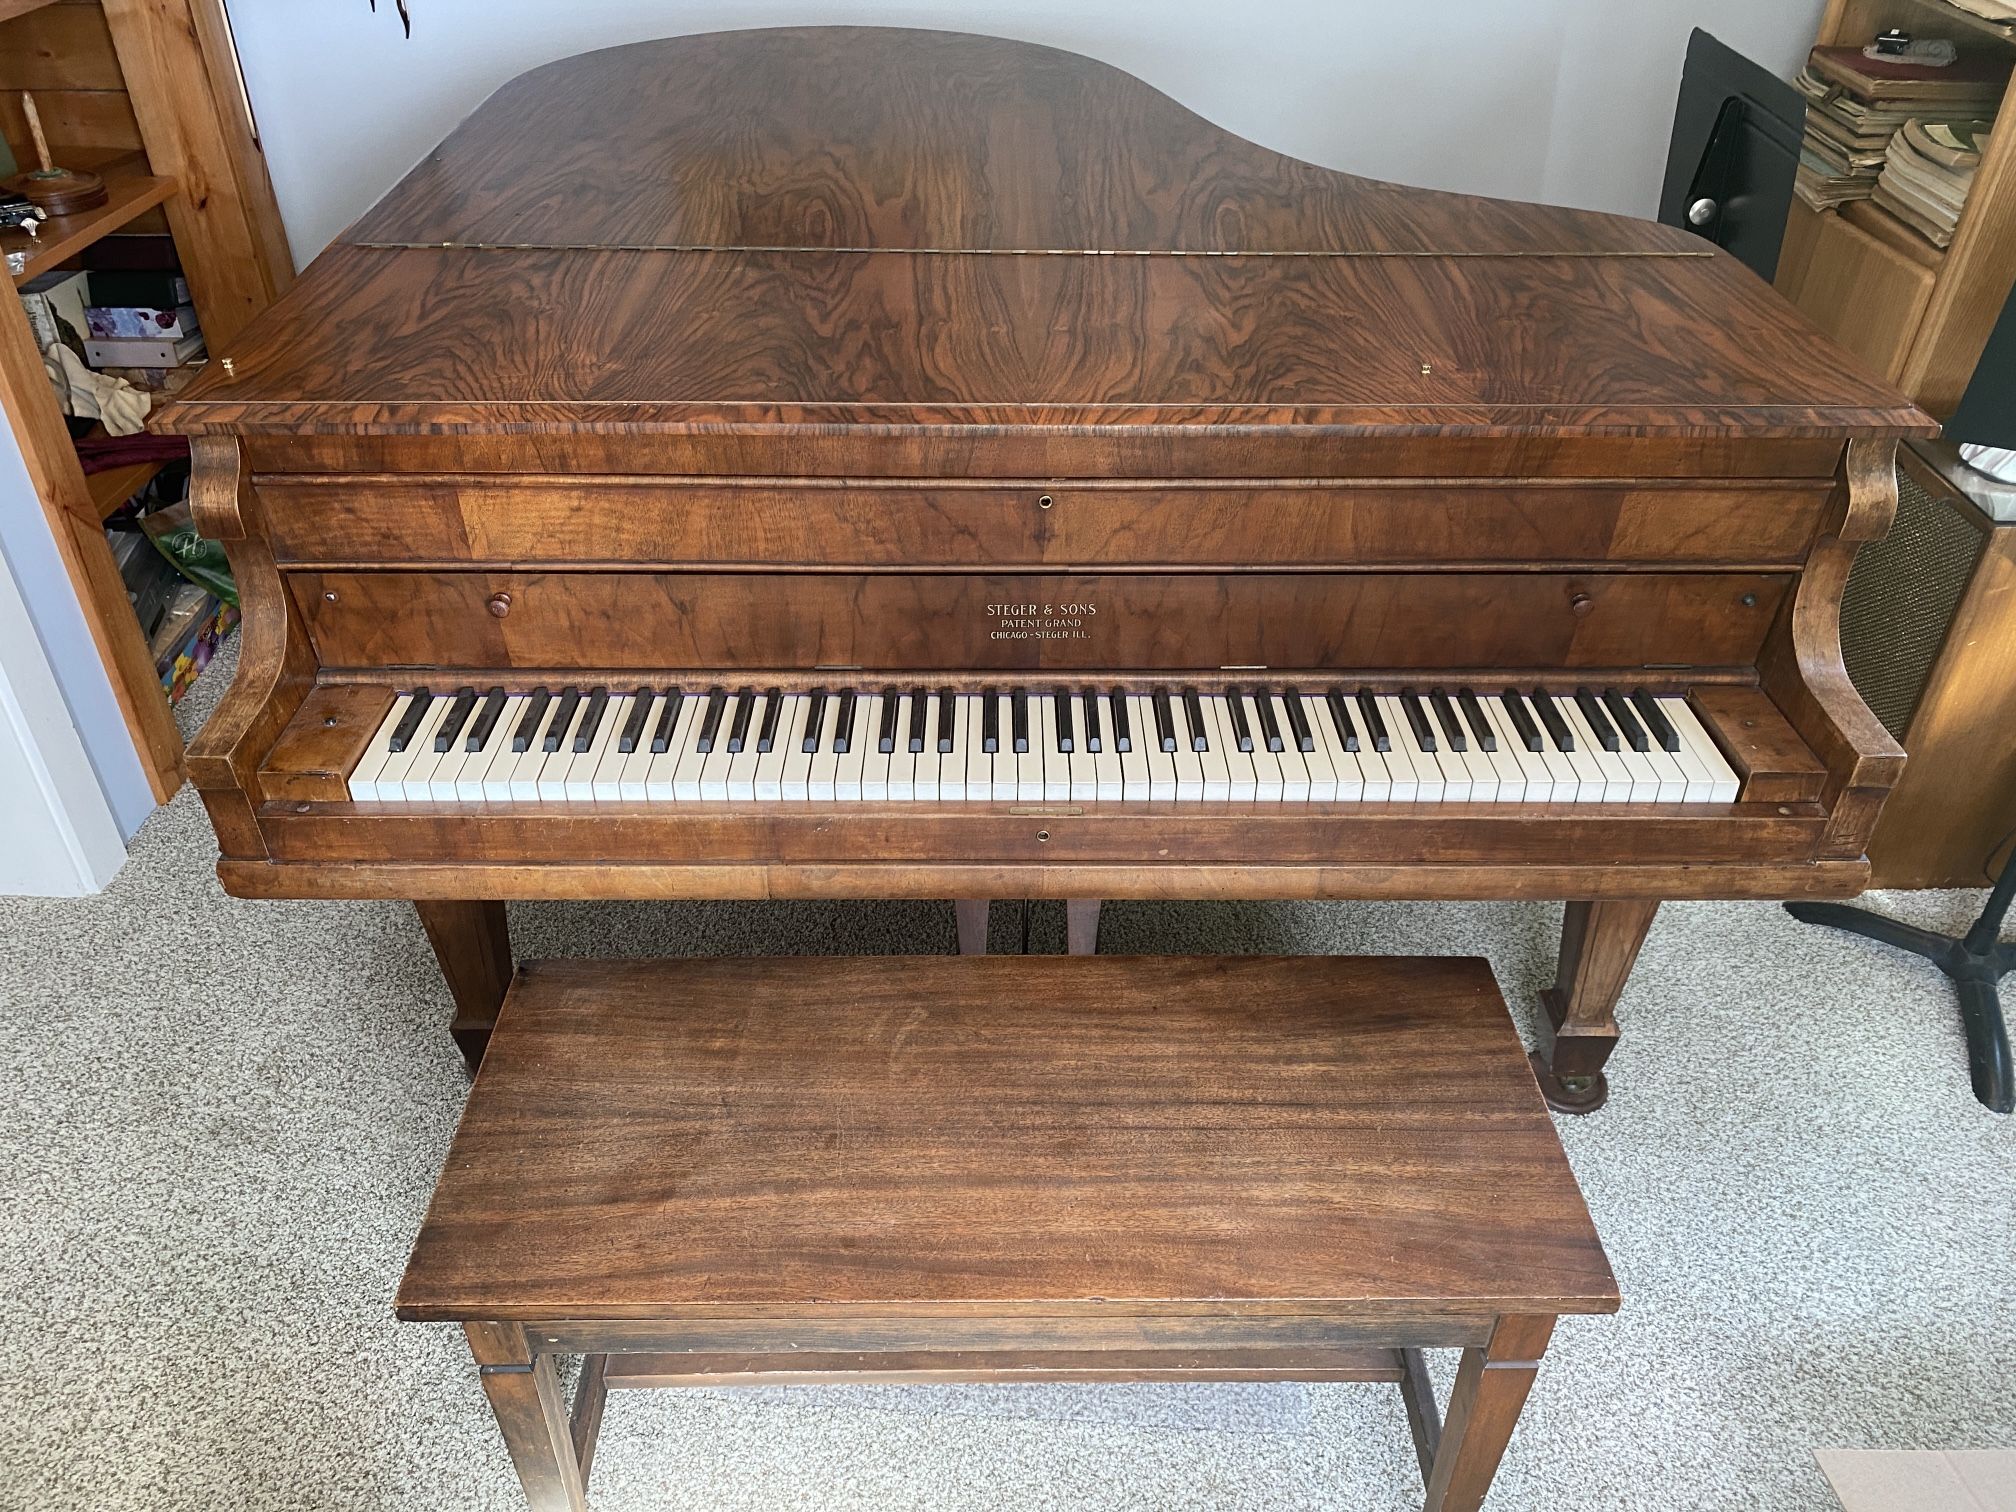 Steger and Sons Grand Piano